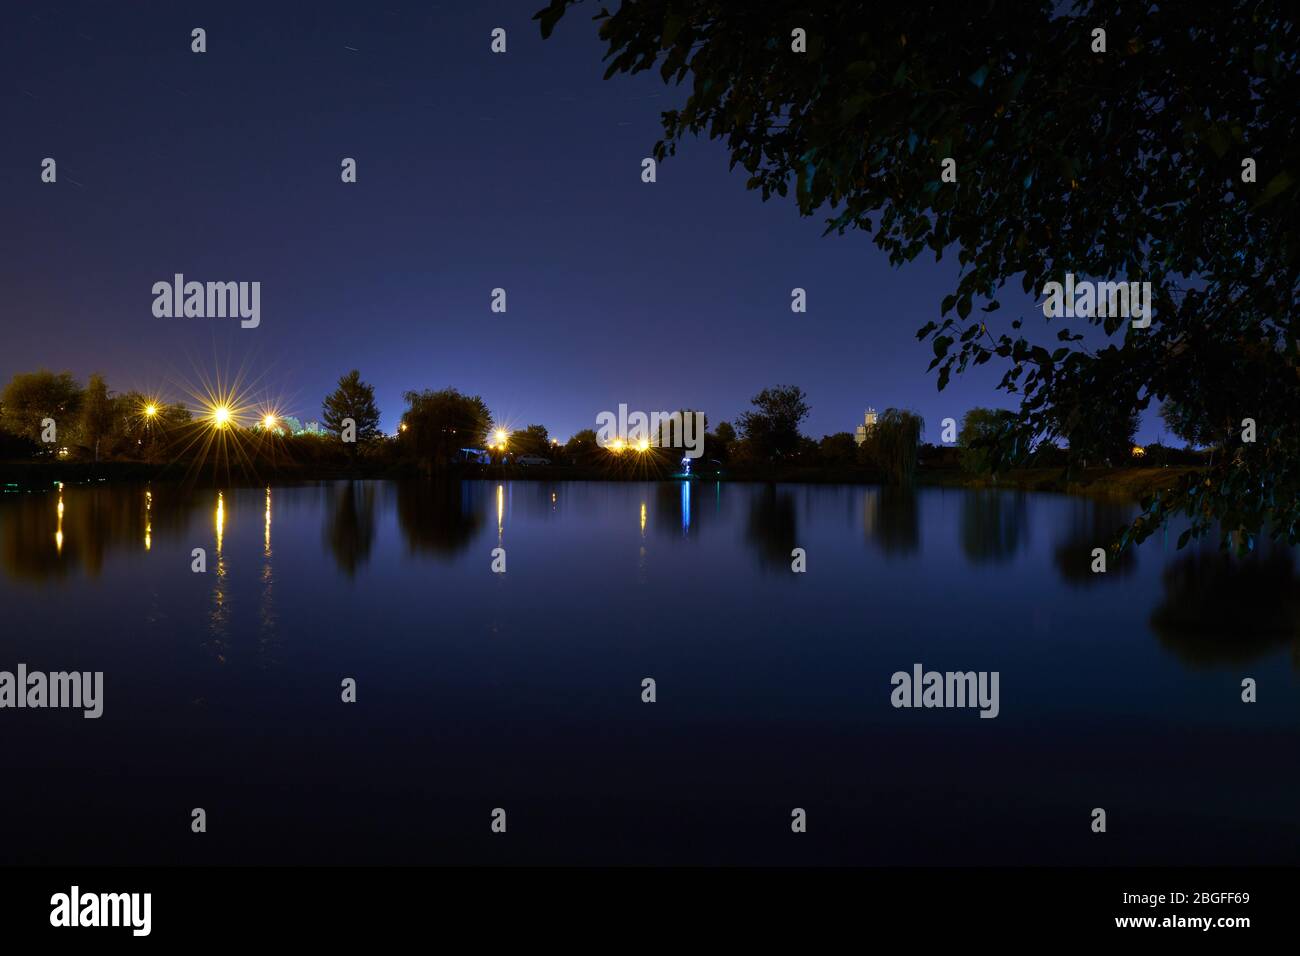 night photography with lake and trees Stock Photo